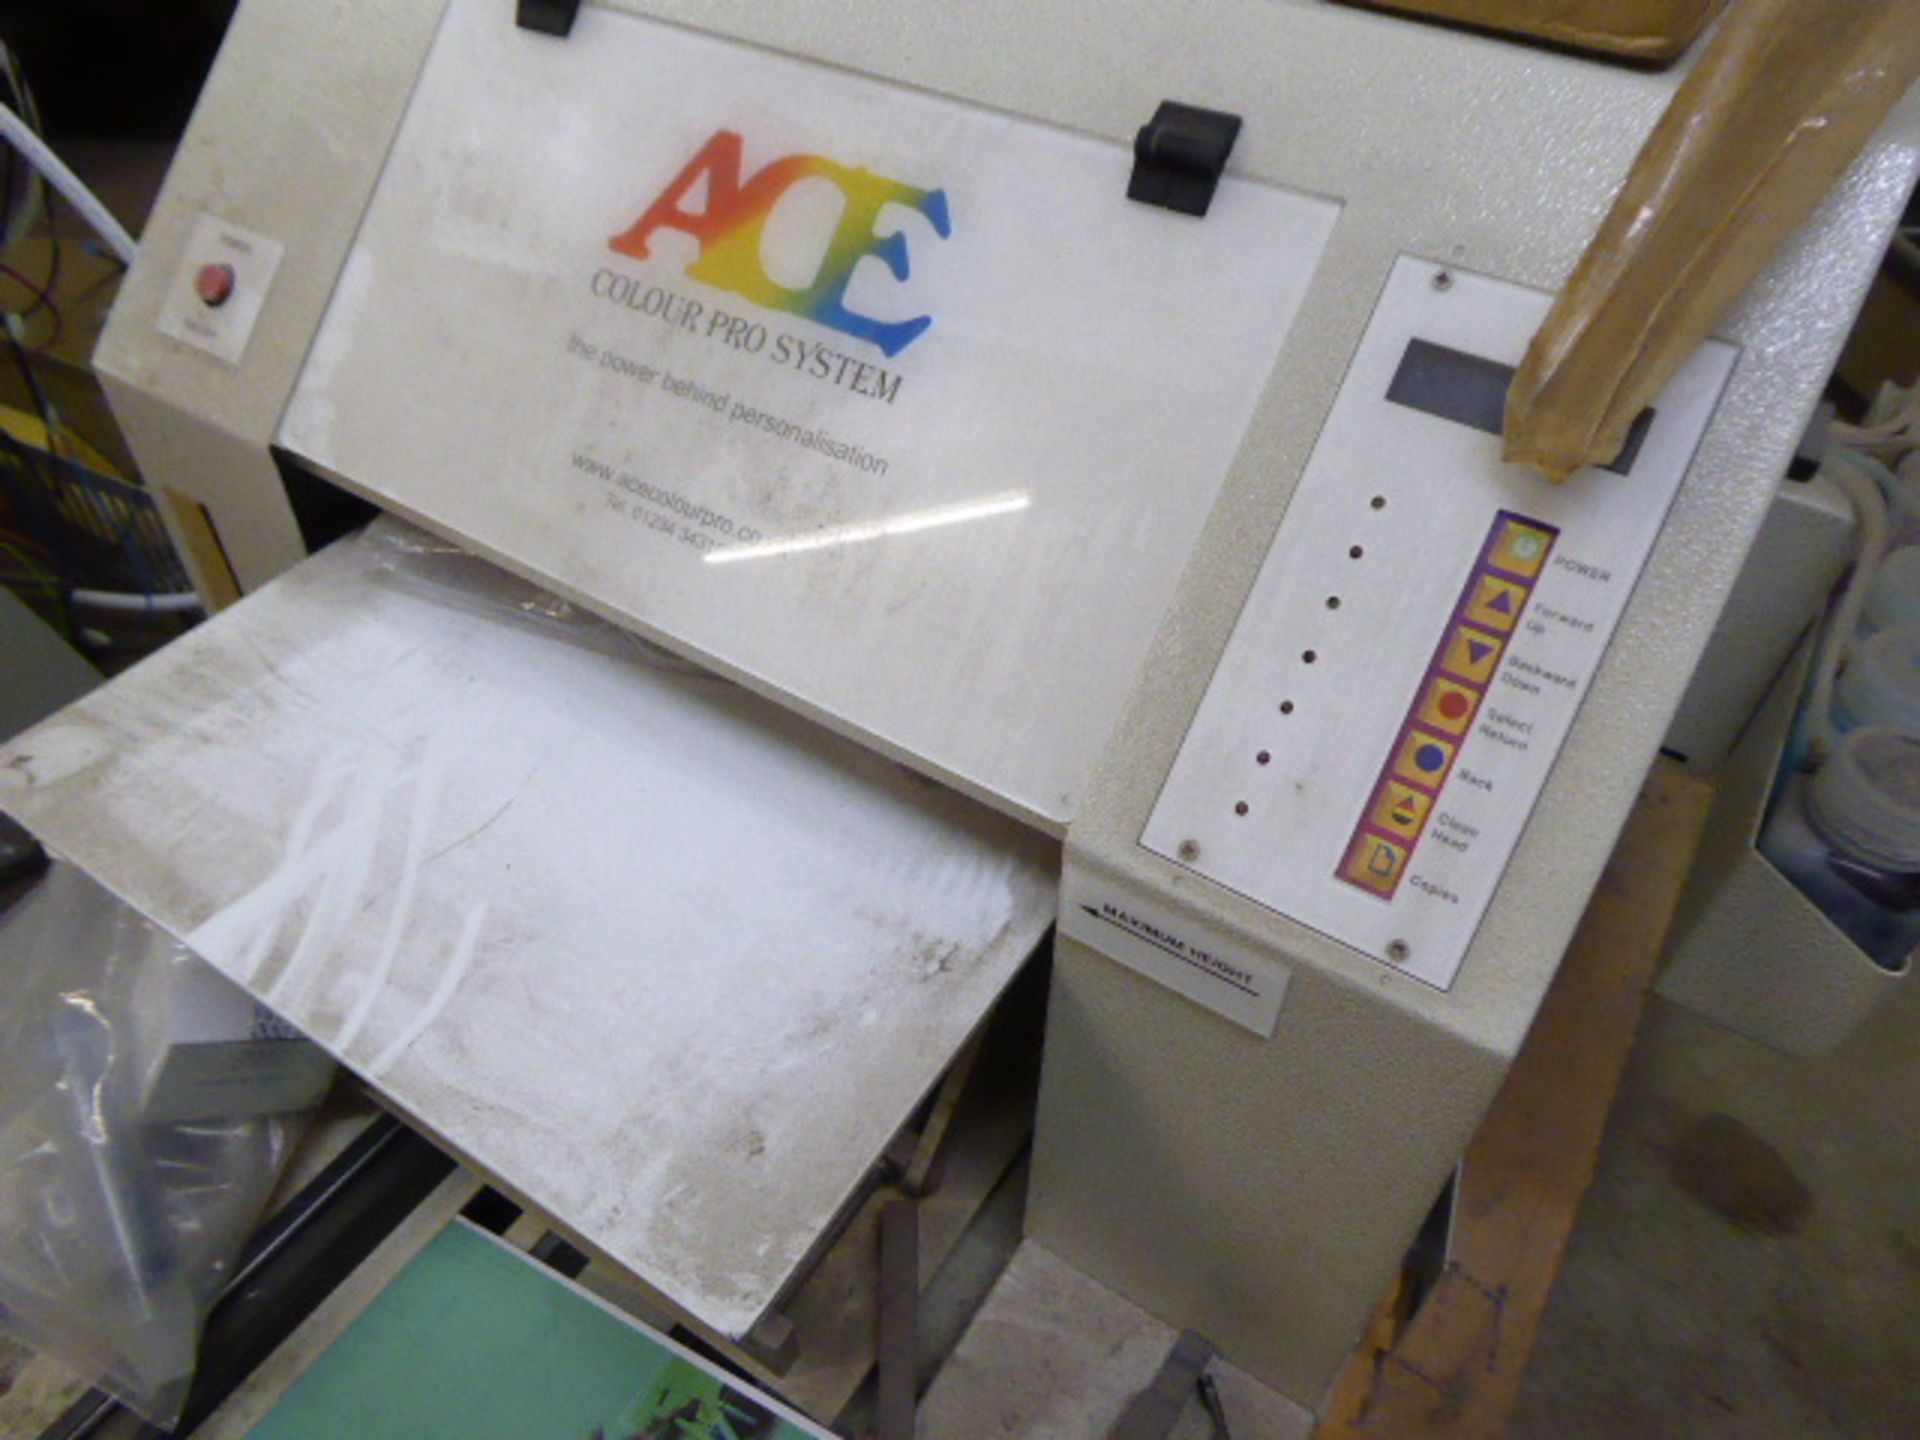 Ace colour pro system specialist printer - Image 2 of 3